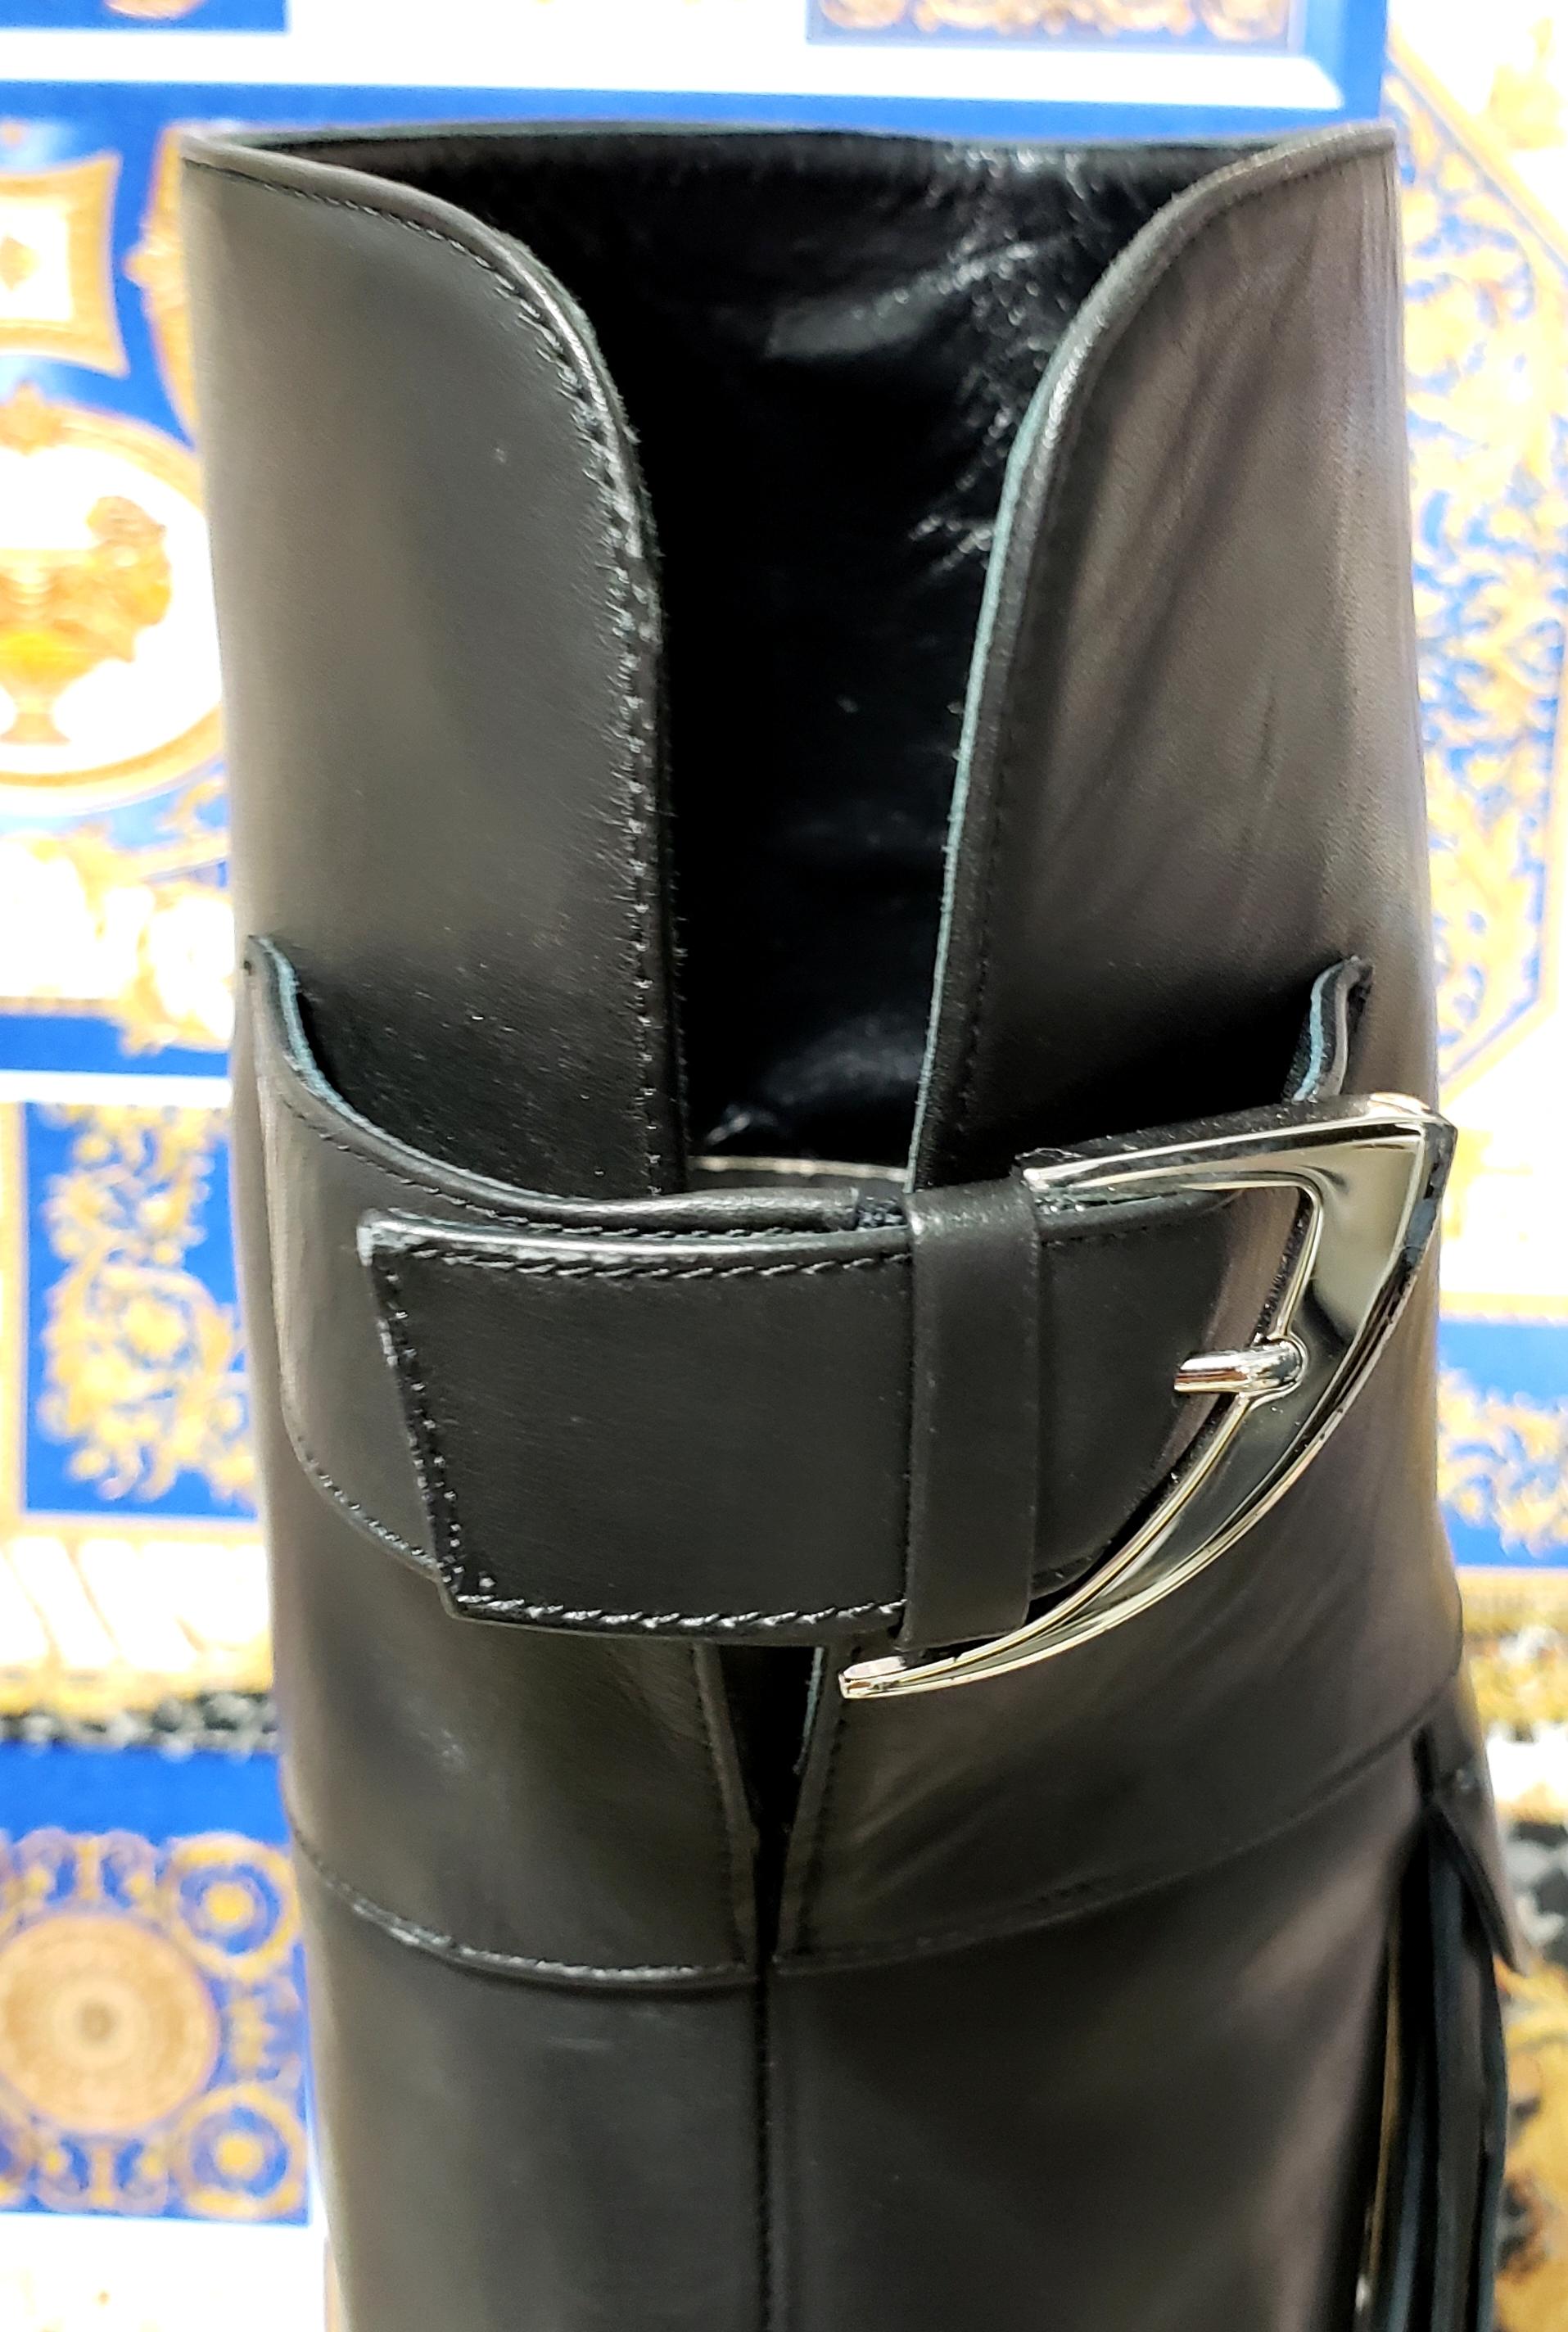 Pre-Fall/14 L#9 VERSACE BLACK LEATHER OVET-the-KNEE Boots with TASSELS 35, 36, 39 3